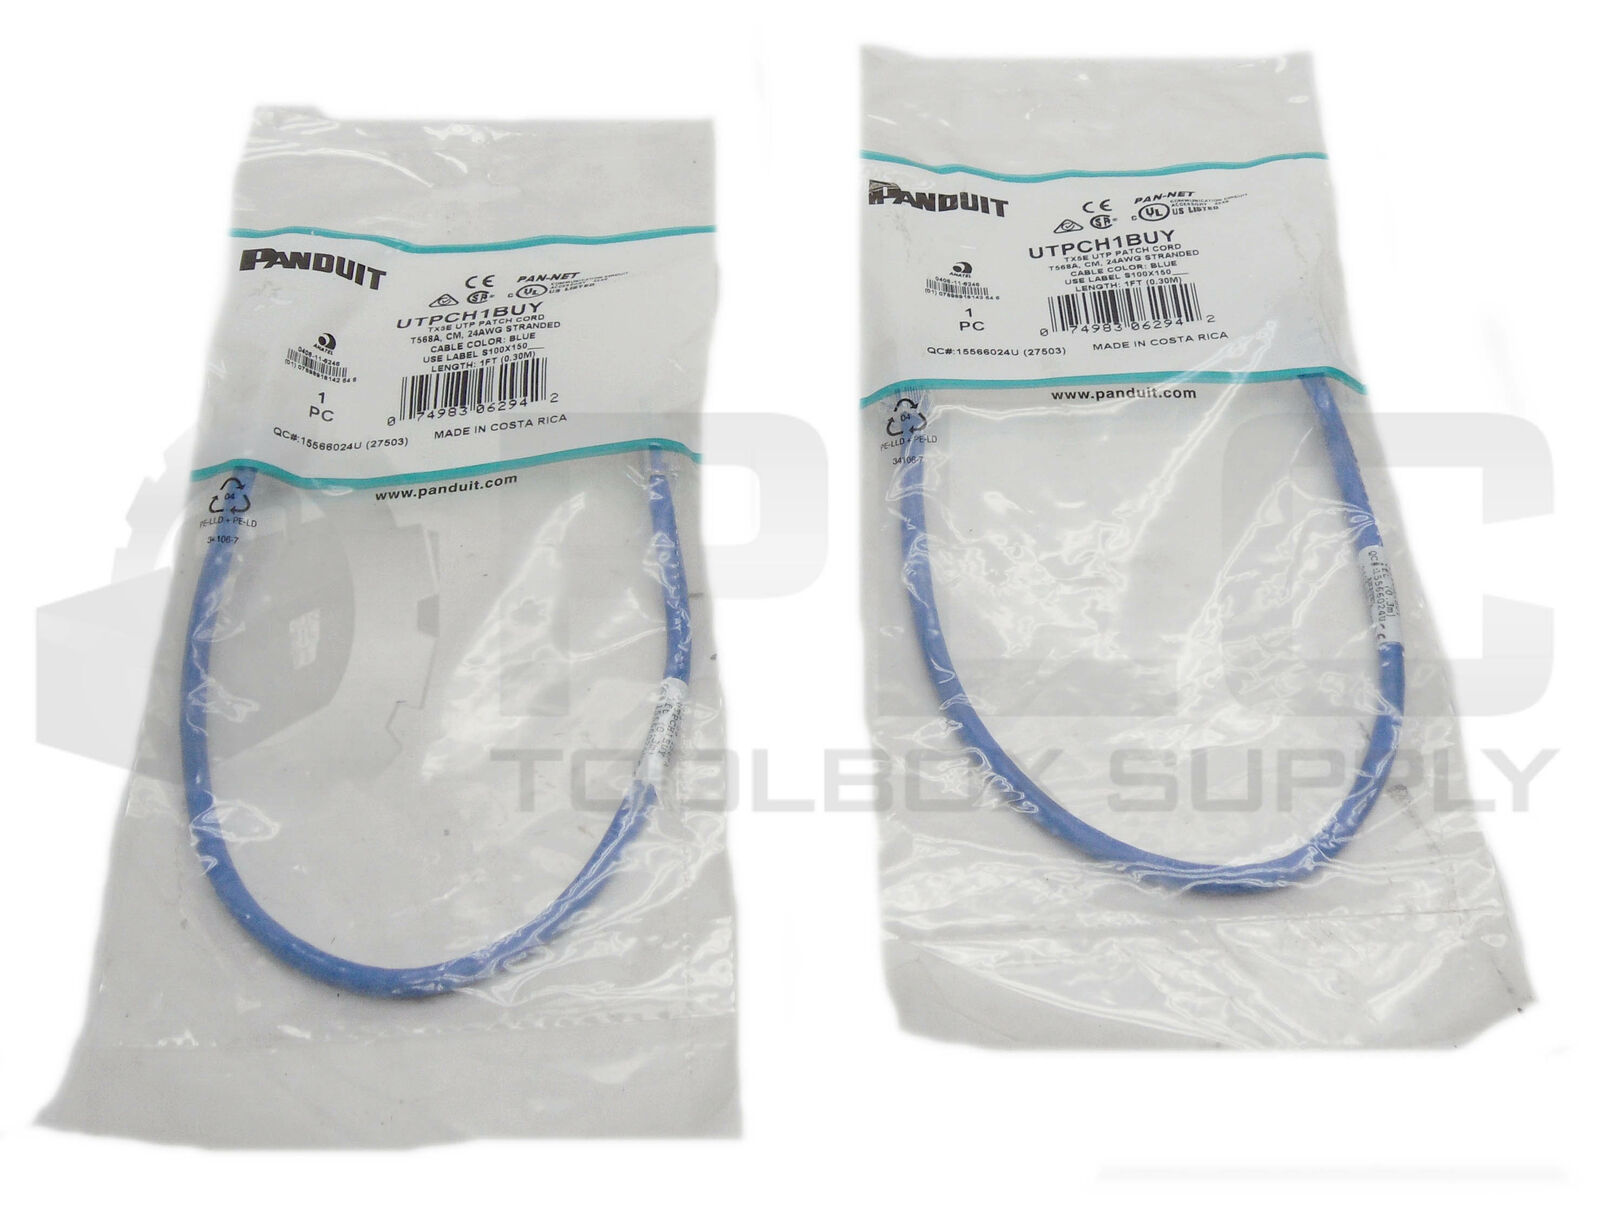 LOT OF 2 SEALED NEW PANDUIT UTPCH1BUY PATCH CORDS TX5E 24AWG 1'